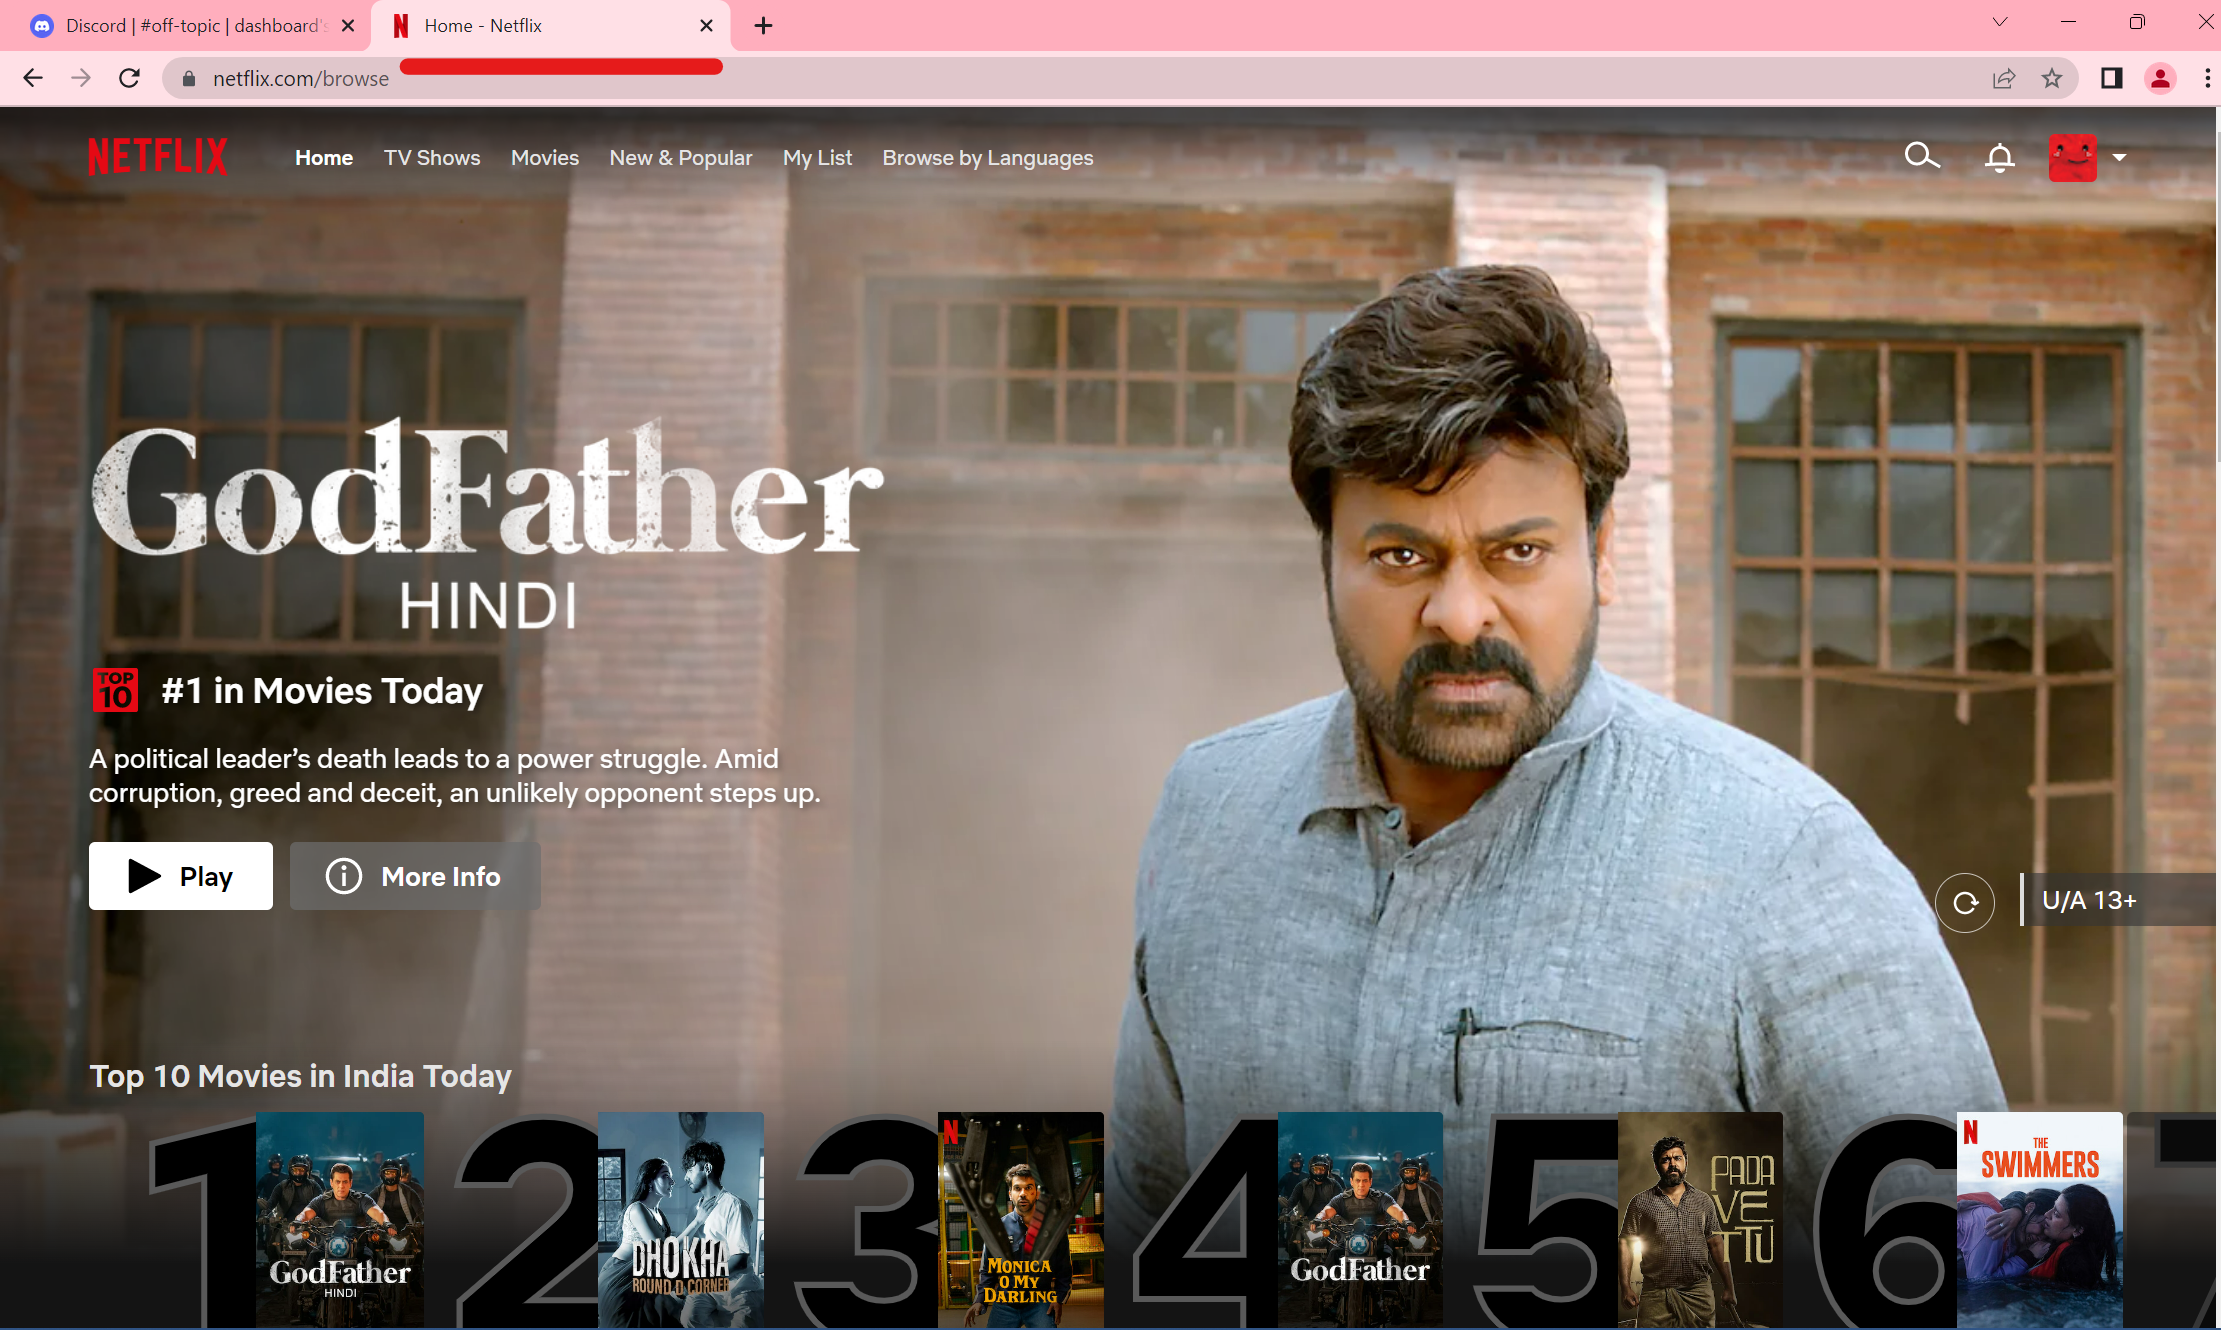 Netflix logged in home page on next tab